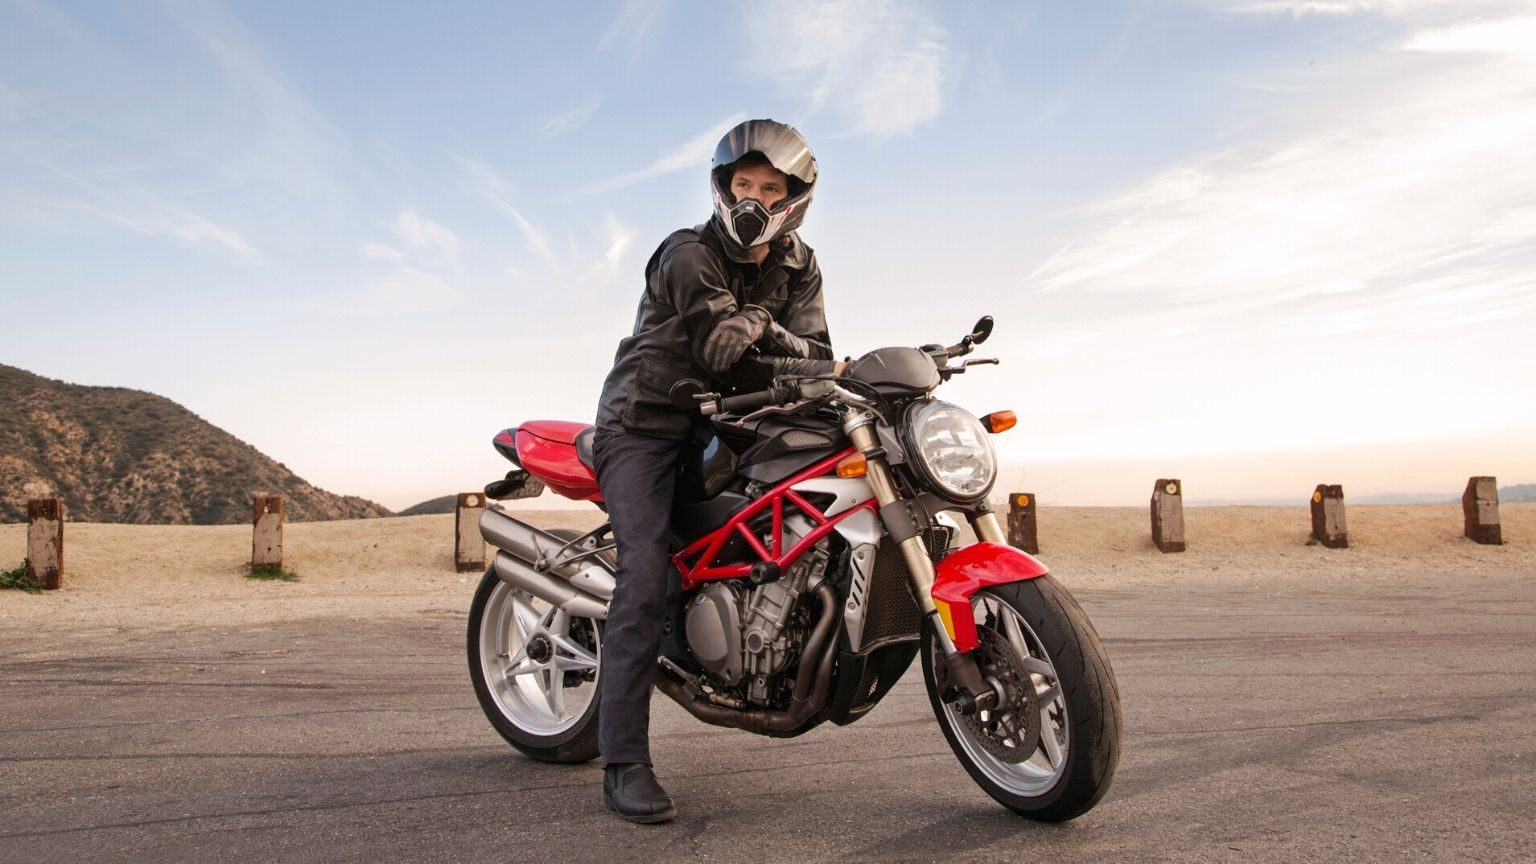 Compare Motorcycle Insurance To Protect Your Ride Finder intended for measurements 1536 X 864